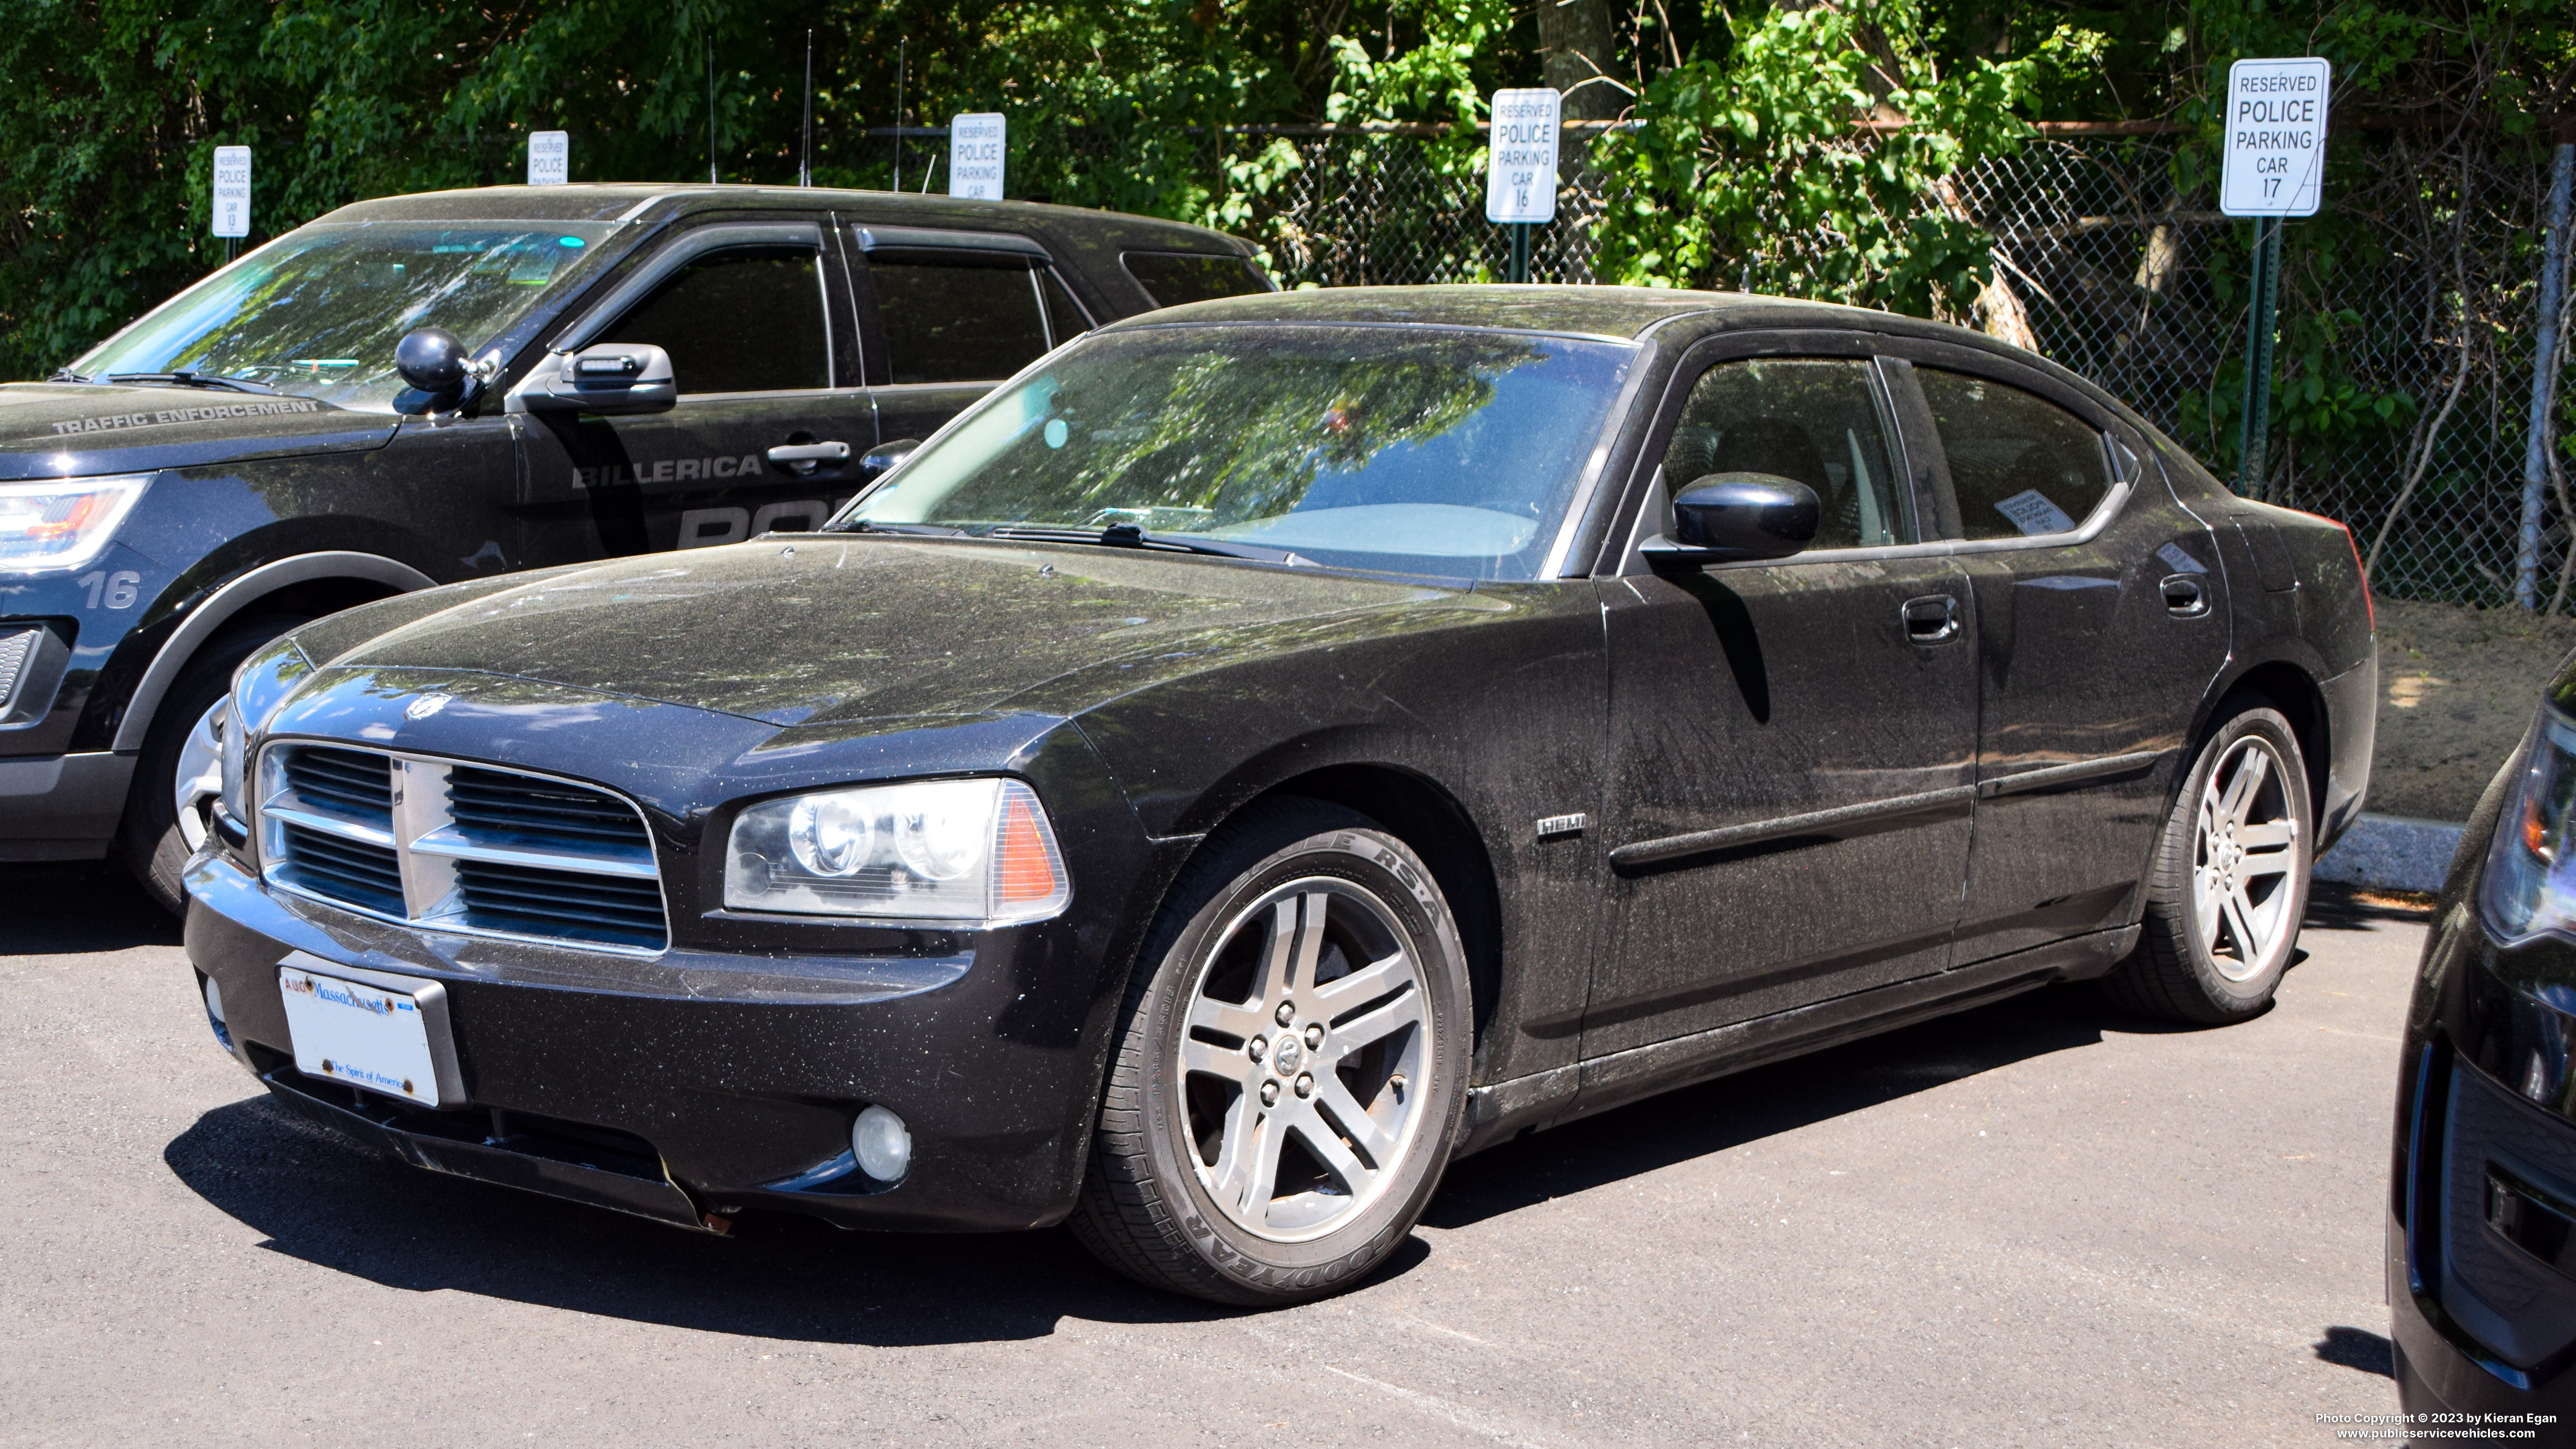 A photo  of Billerica Police
            Unmarked Unit, a 2006 Dodge Charger             taken by Kieran Egan